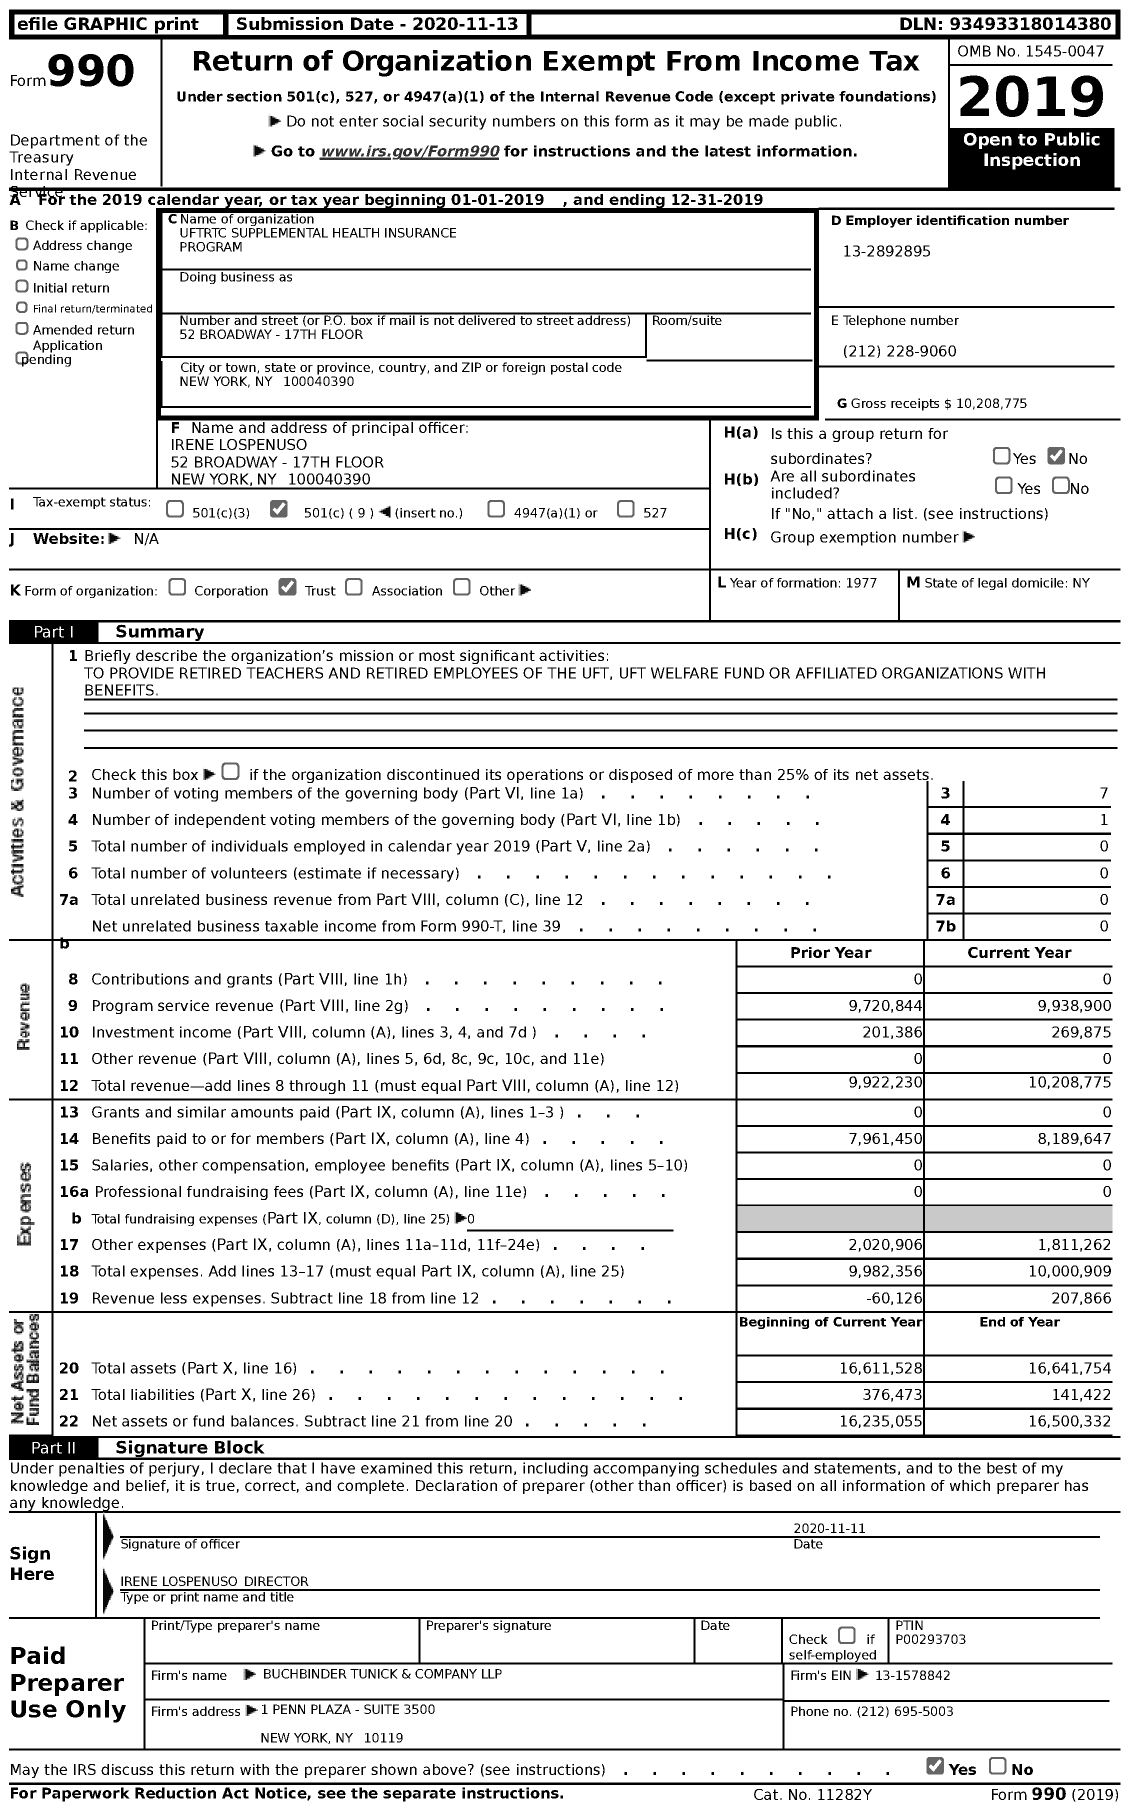 Image of first page of 2019 Form 990 for Uftrtc Supplemental Health Insurance Program